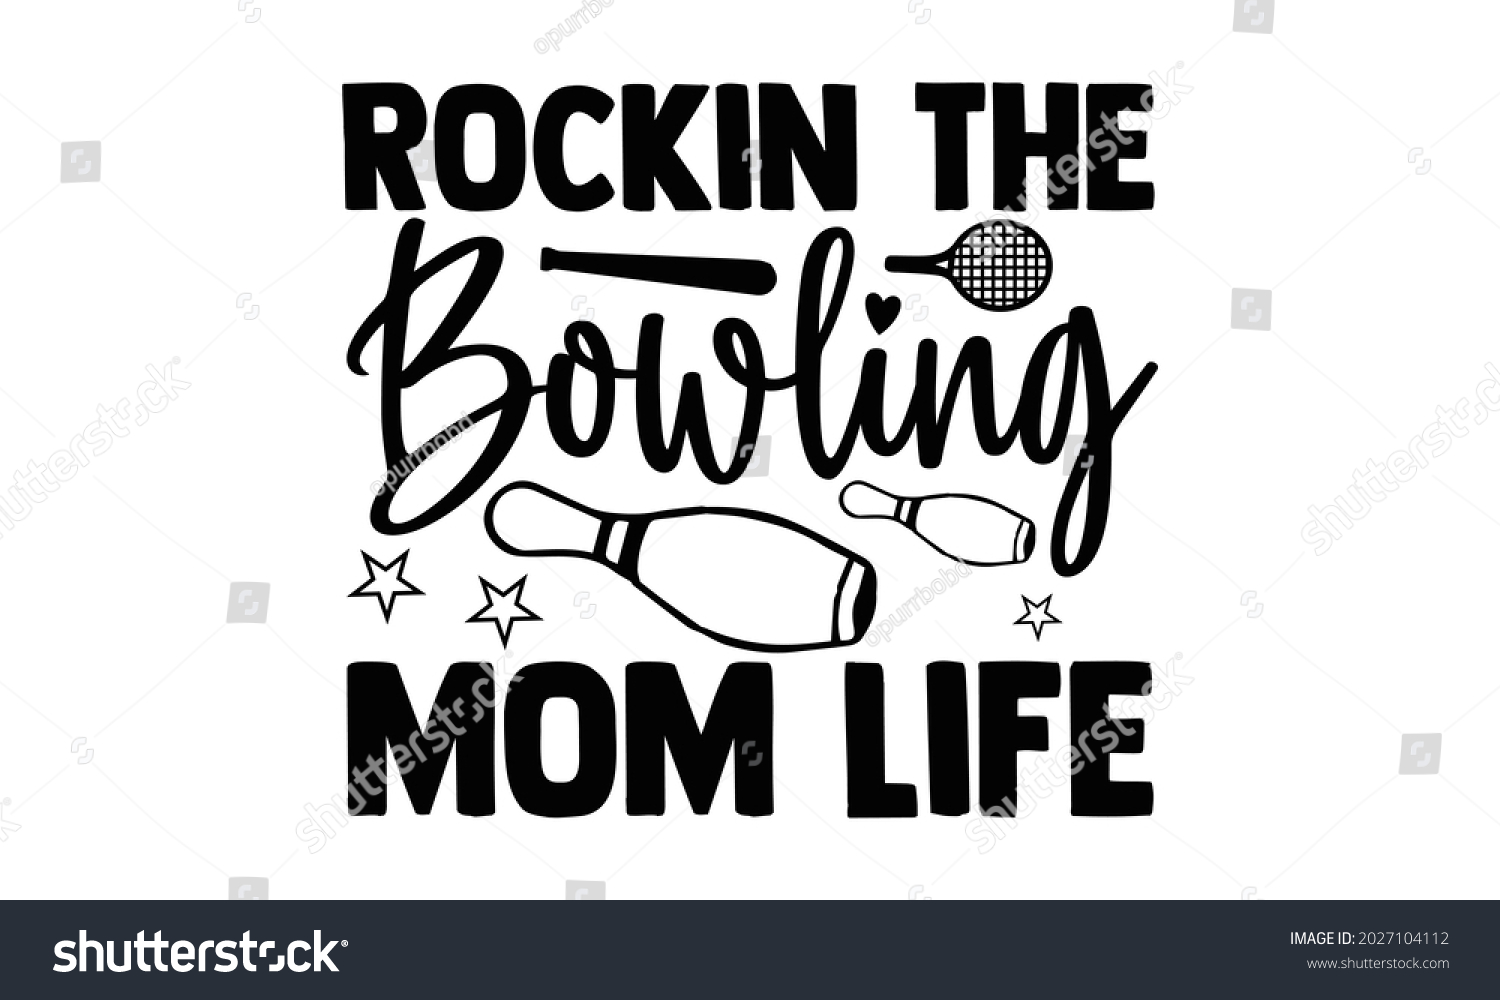 SVG of Rockin the bowling mom life- Bowling t shirts design, Hand drawn lettering phrase, Calligraphy t shirt design, Isolated on white background, svg Files for Cutting Cricut, Silhouette, EPS 10 svg